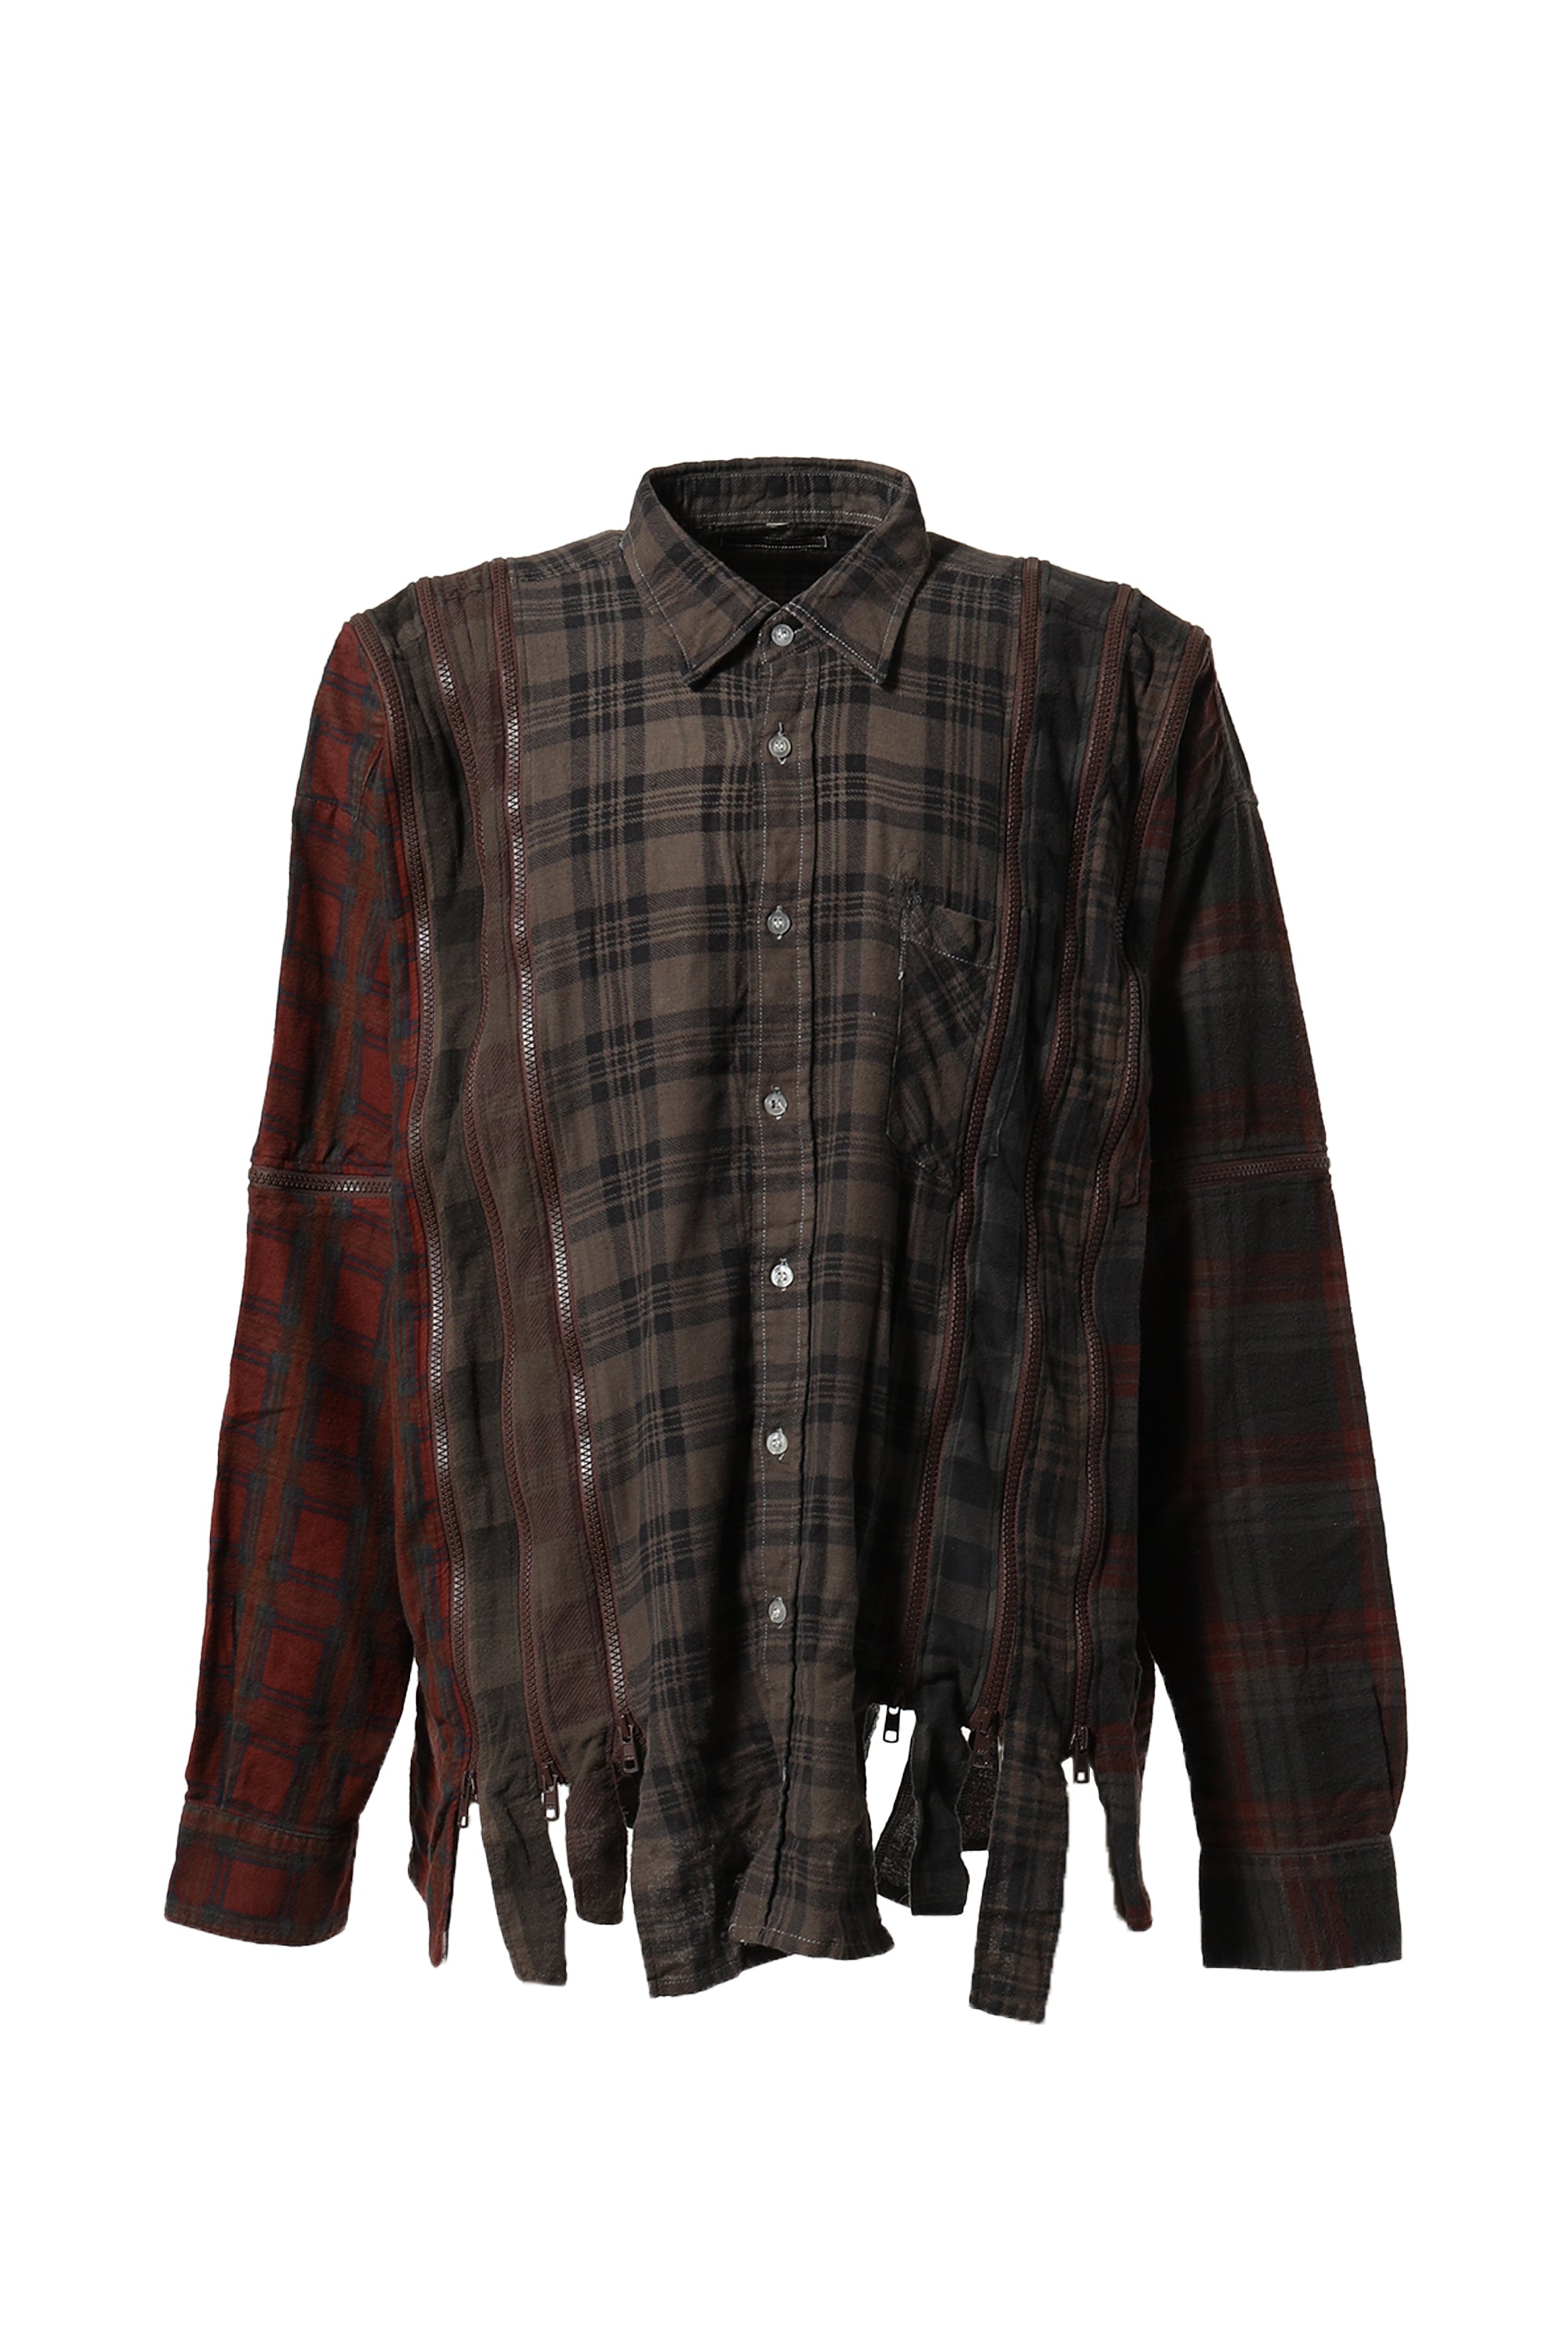 Rebuild By Needles FW23 FLANNEL SHIRT -> 7 CUTS ZIPPED WIDE SHIRT